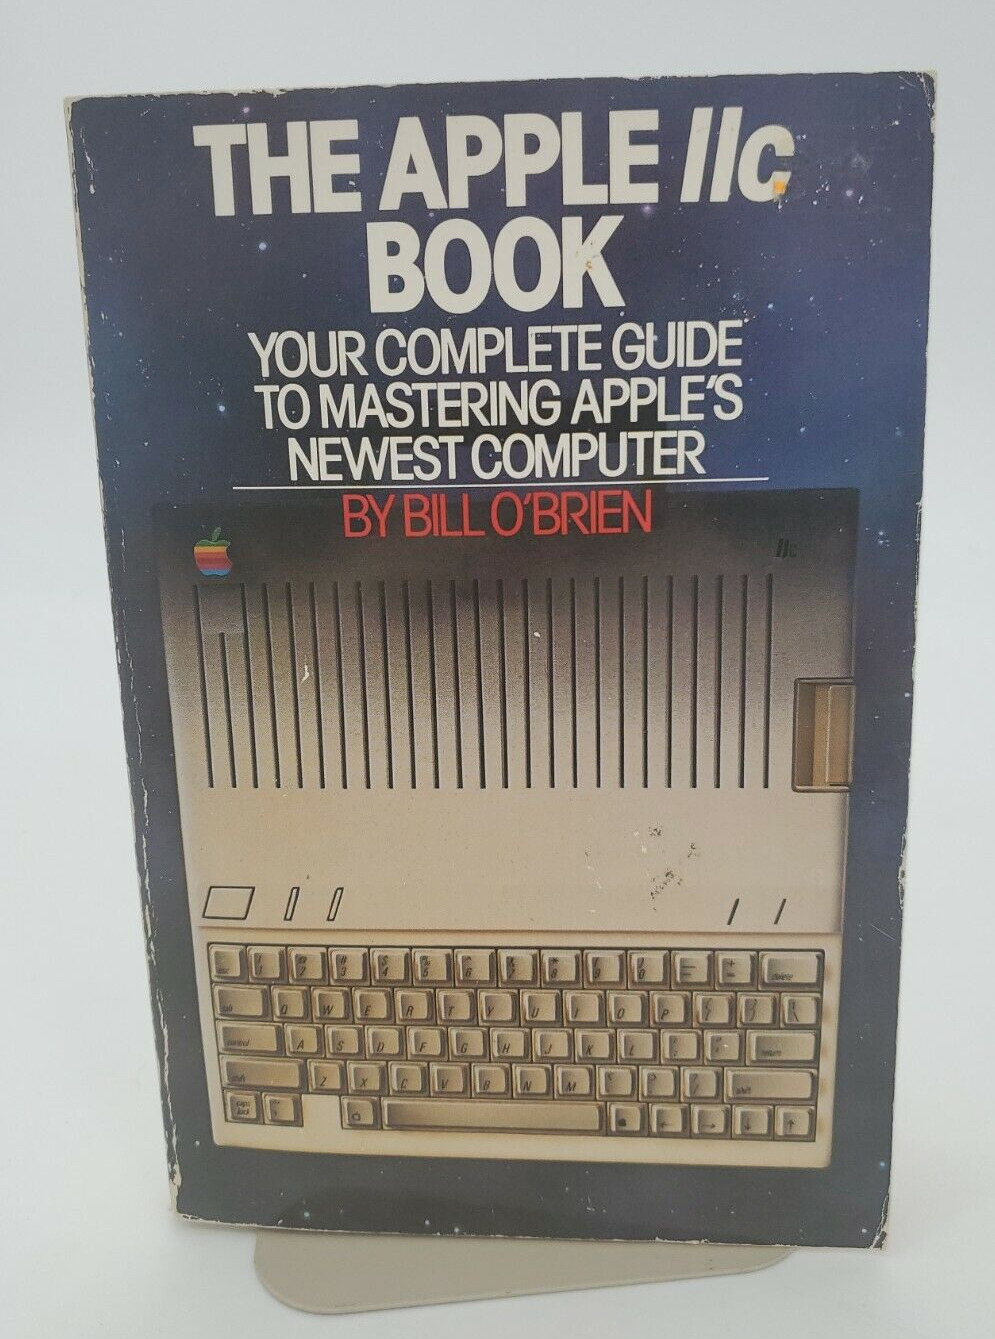 Vintage 1984 the apple //c book By Bill O'Brien computer guide